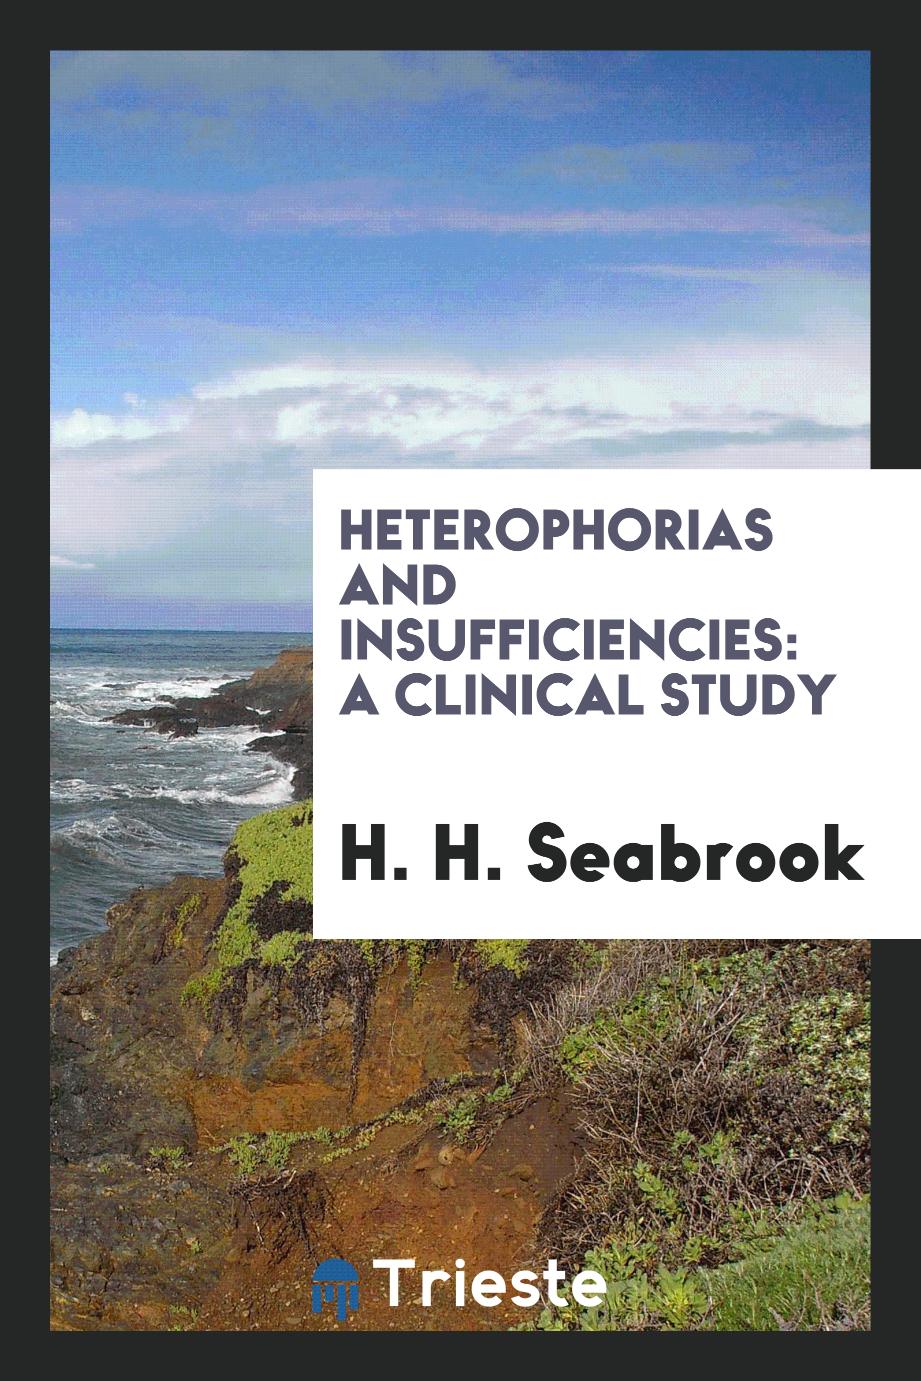 Heterophorias and Insufficiencies: A Clinical Study